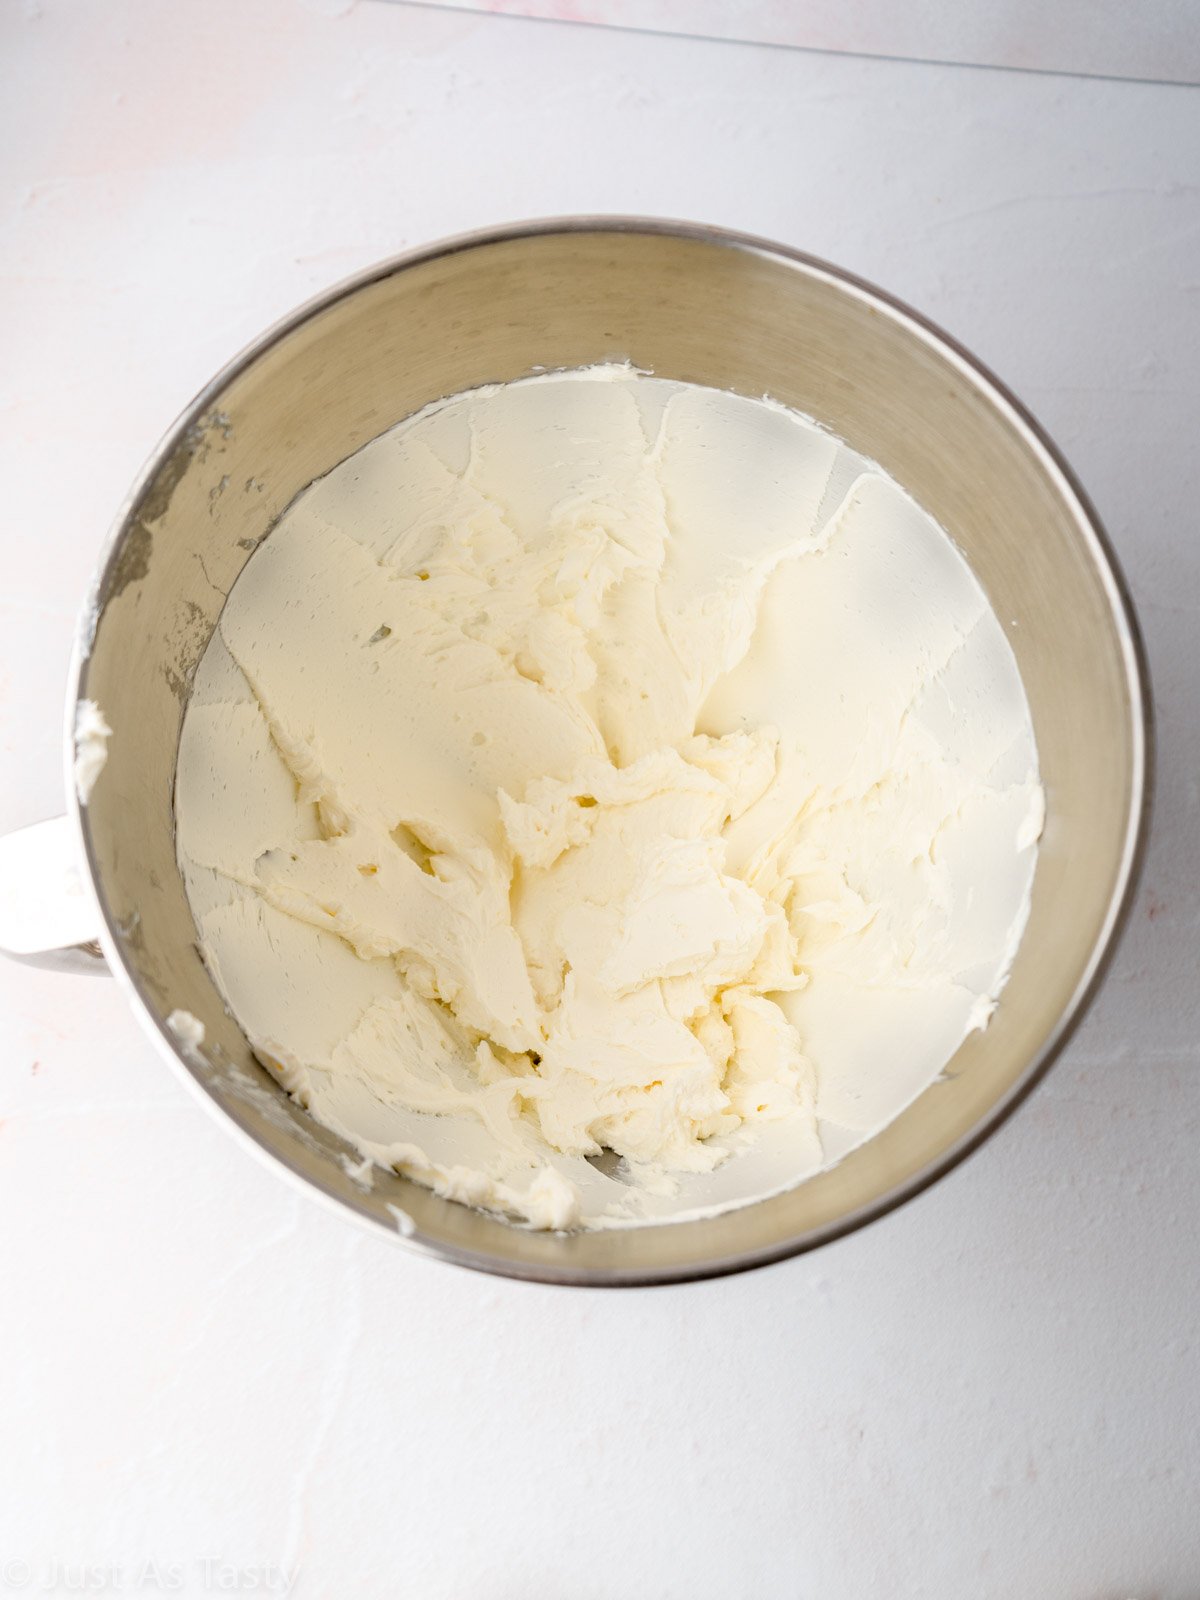 Cream cheese beaten in a mixing bowl.